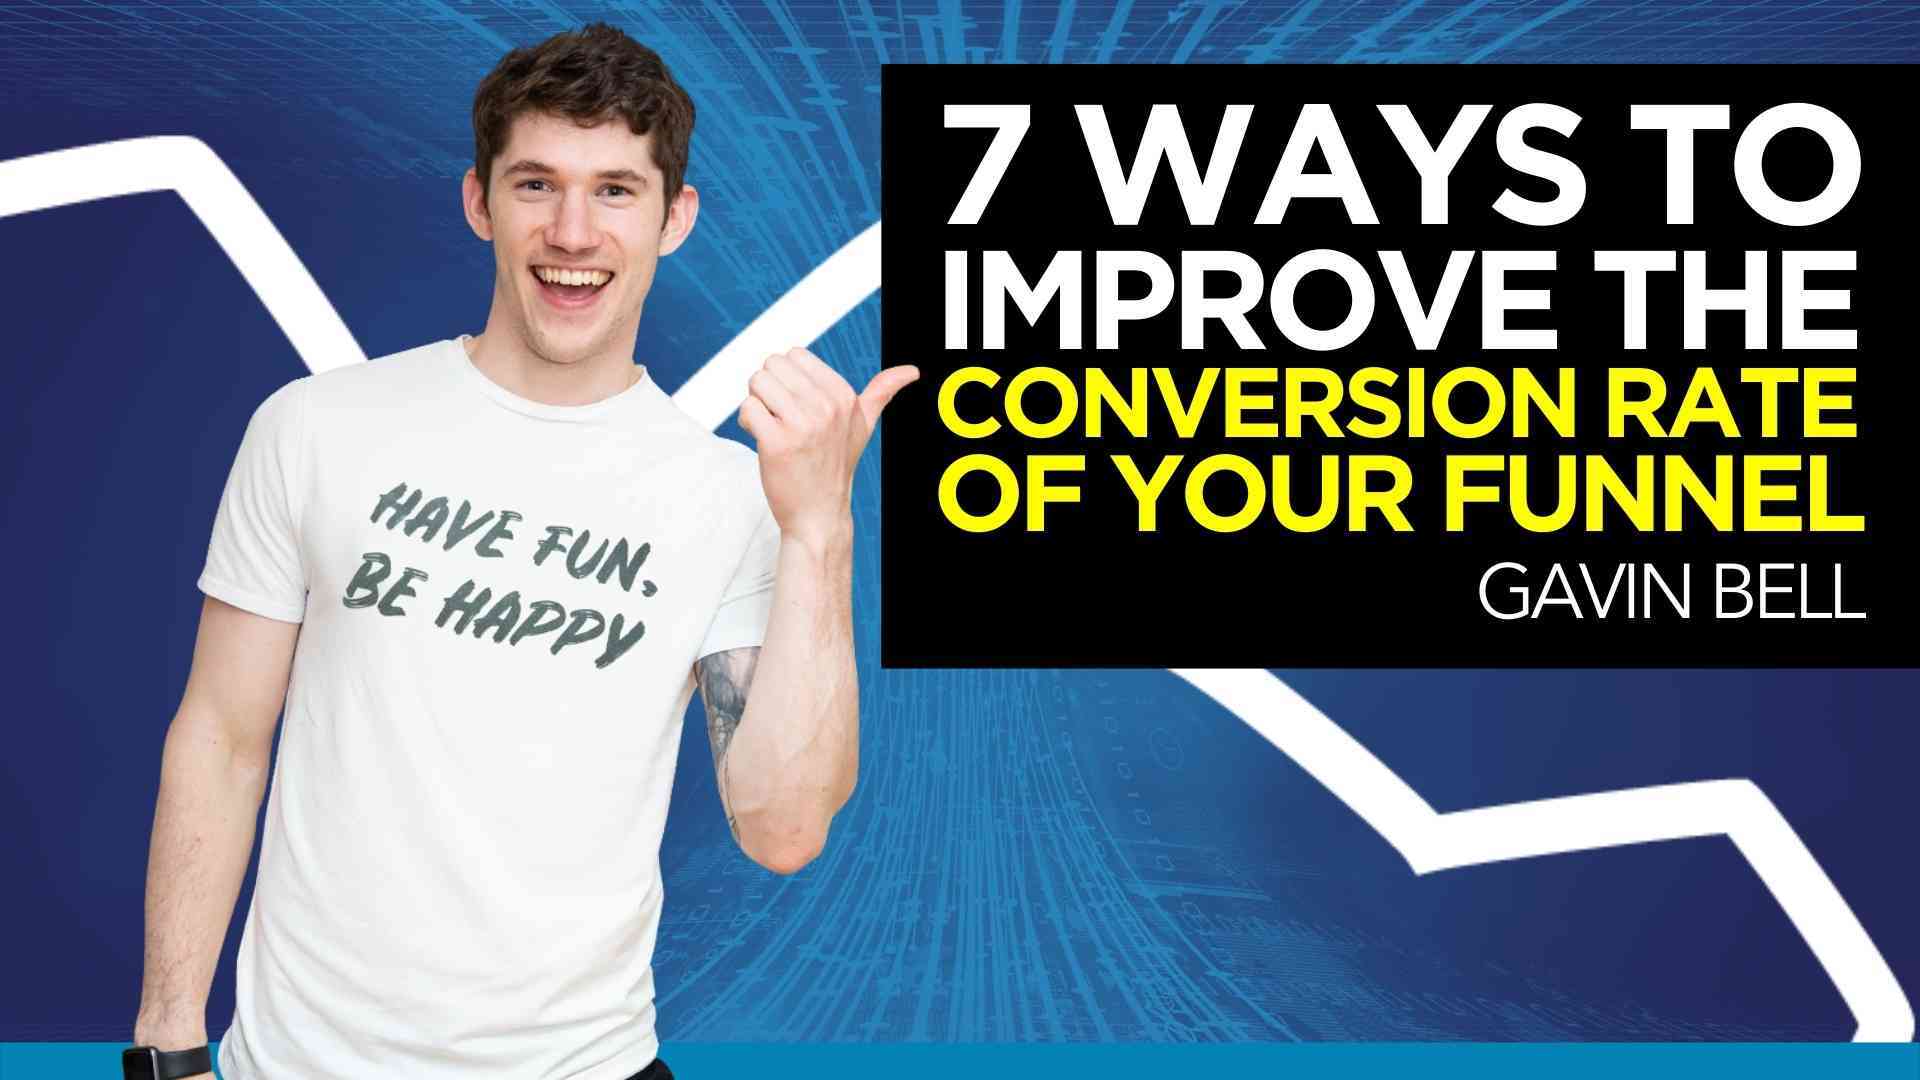 7 Ways To Improve The Conversion Rate Of Your Funnel